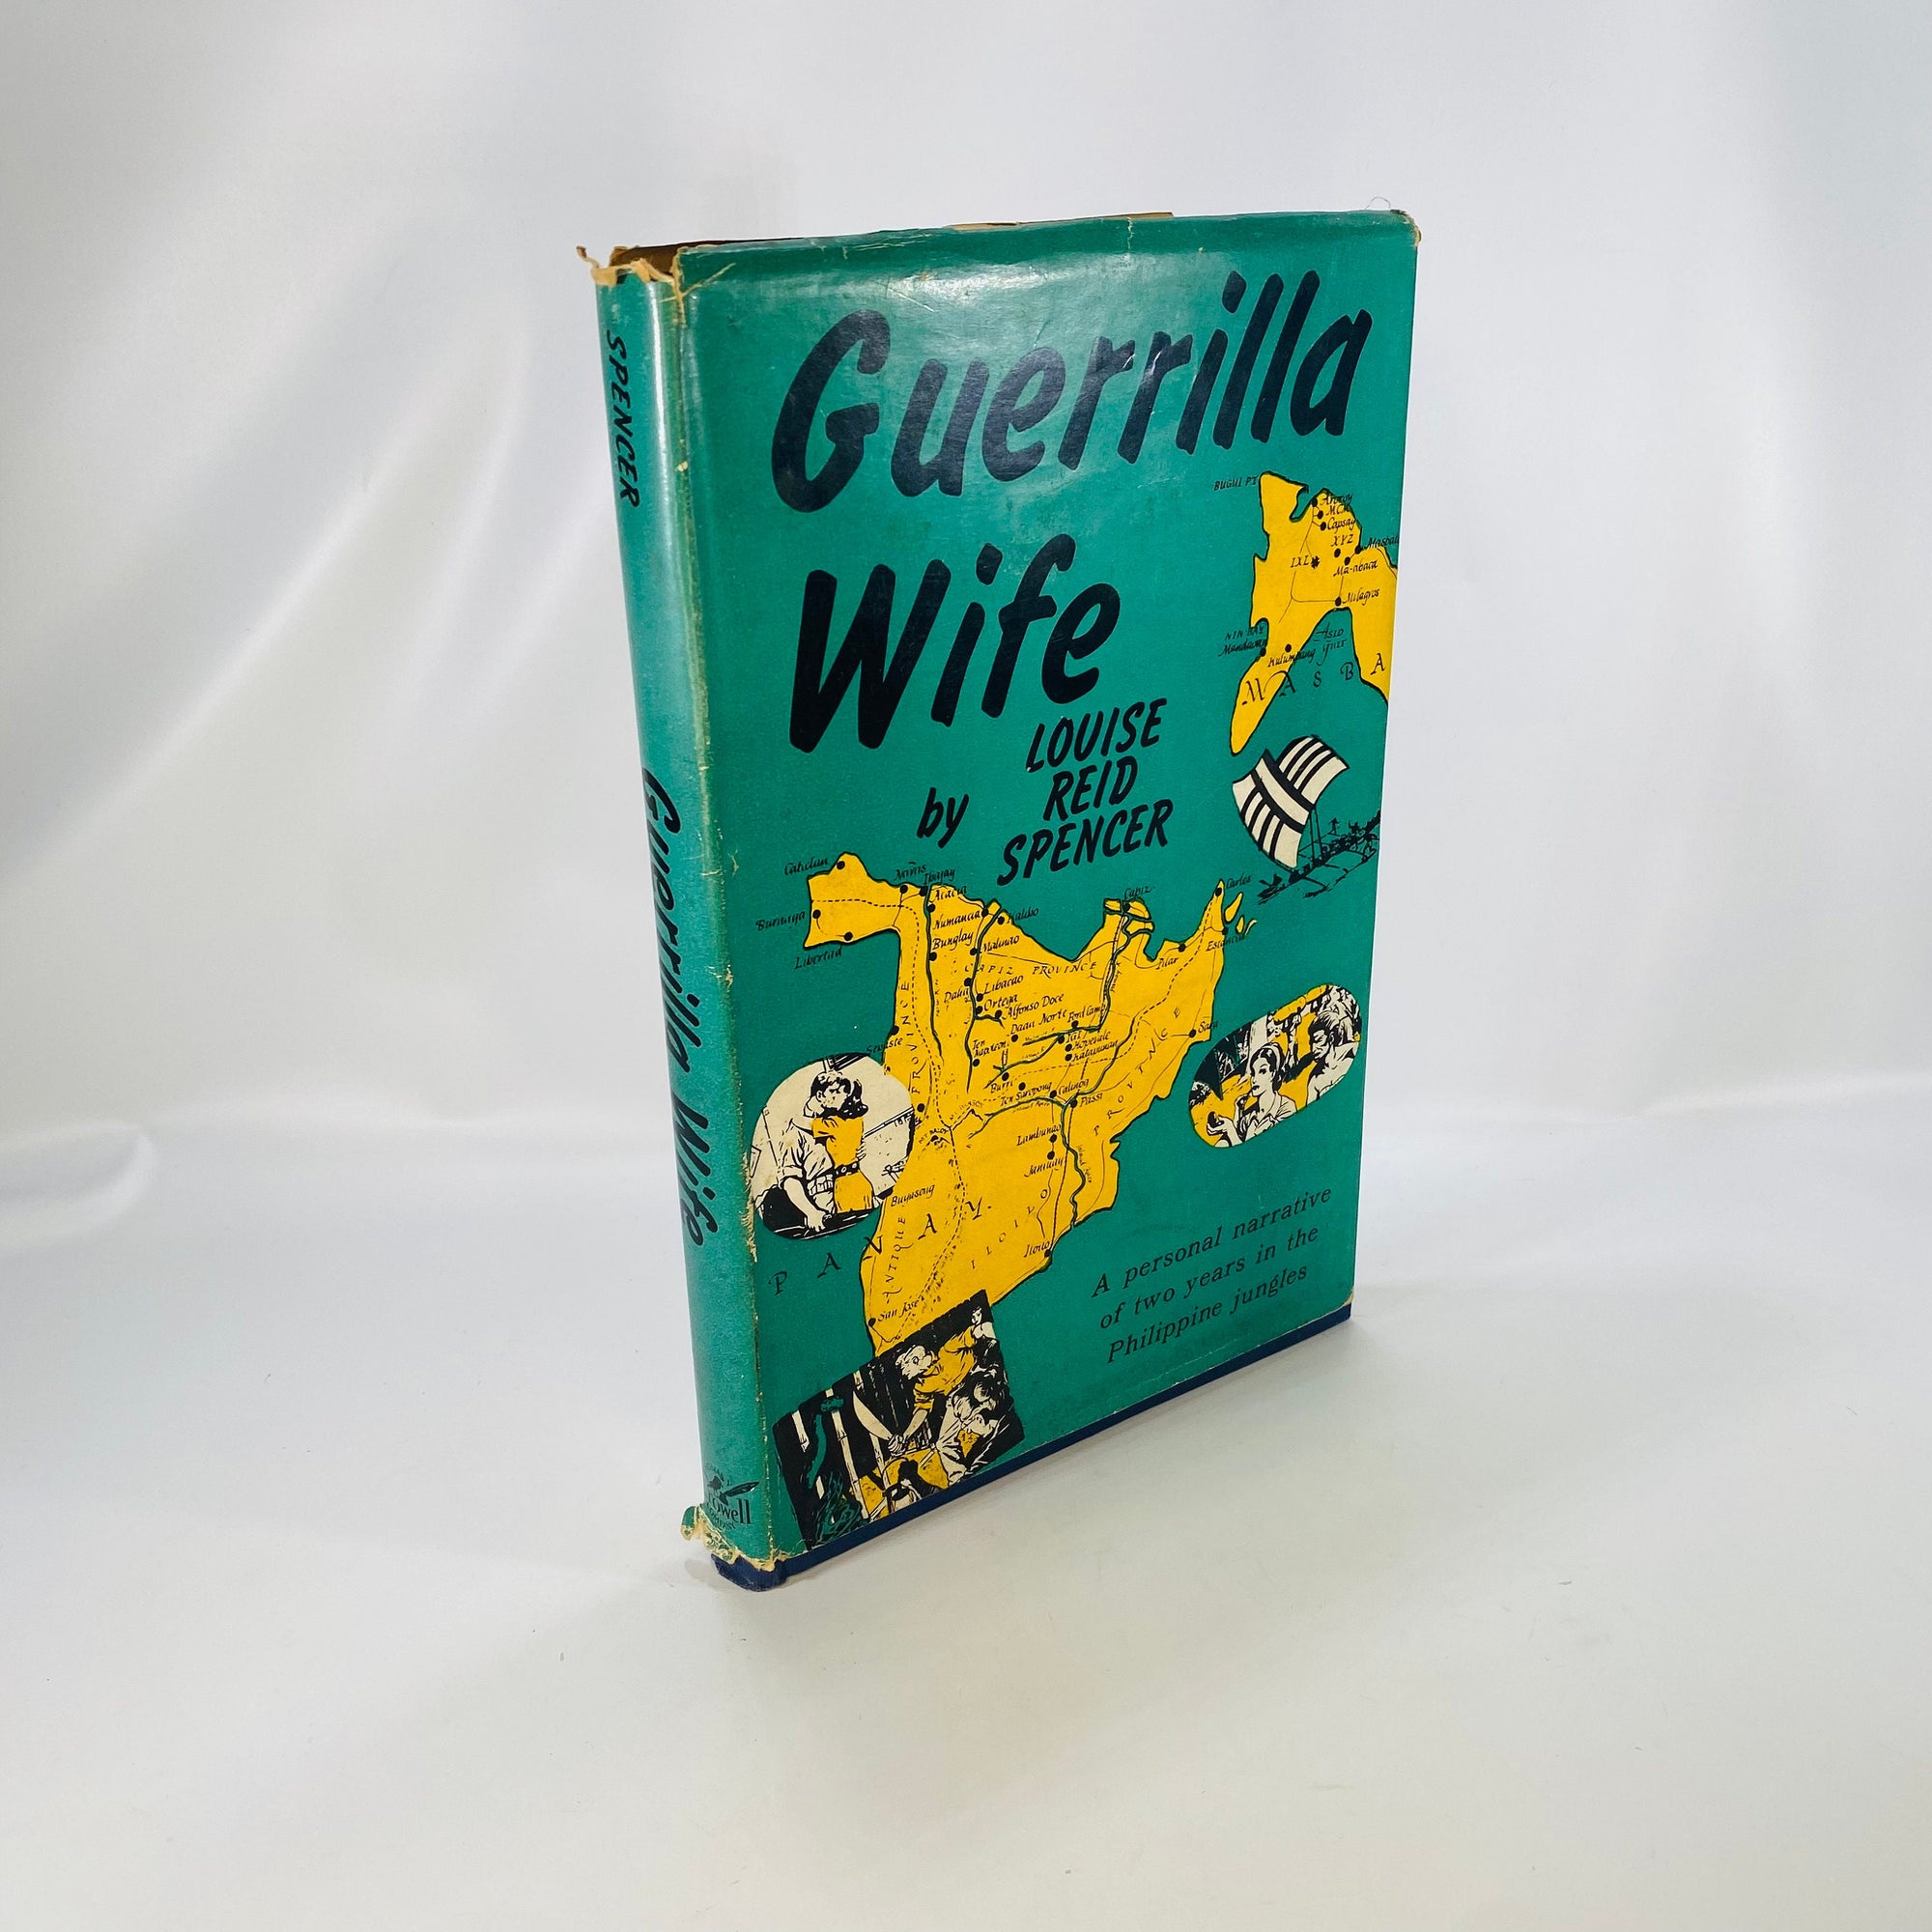 Guerrilla Wife by Lousie Reid Spencer 1945 Thomas Y. Crowell Company Vintage Book